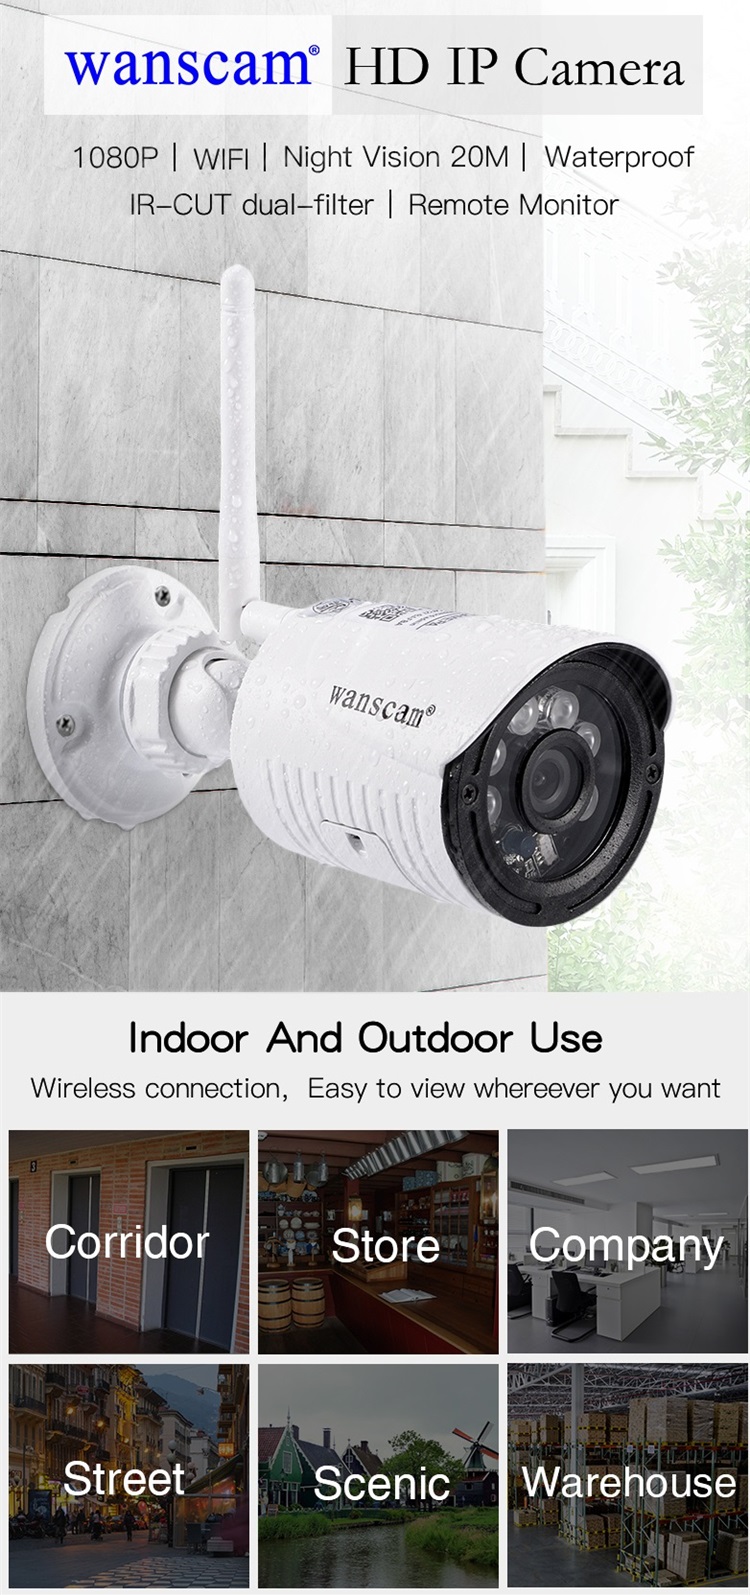 Wanscam HW0022 1080P WiFi IP Camera Wireless CCTV 2MP Outdoor Waterproof Onvif Security Camera Support 128G TF Card 7